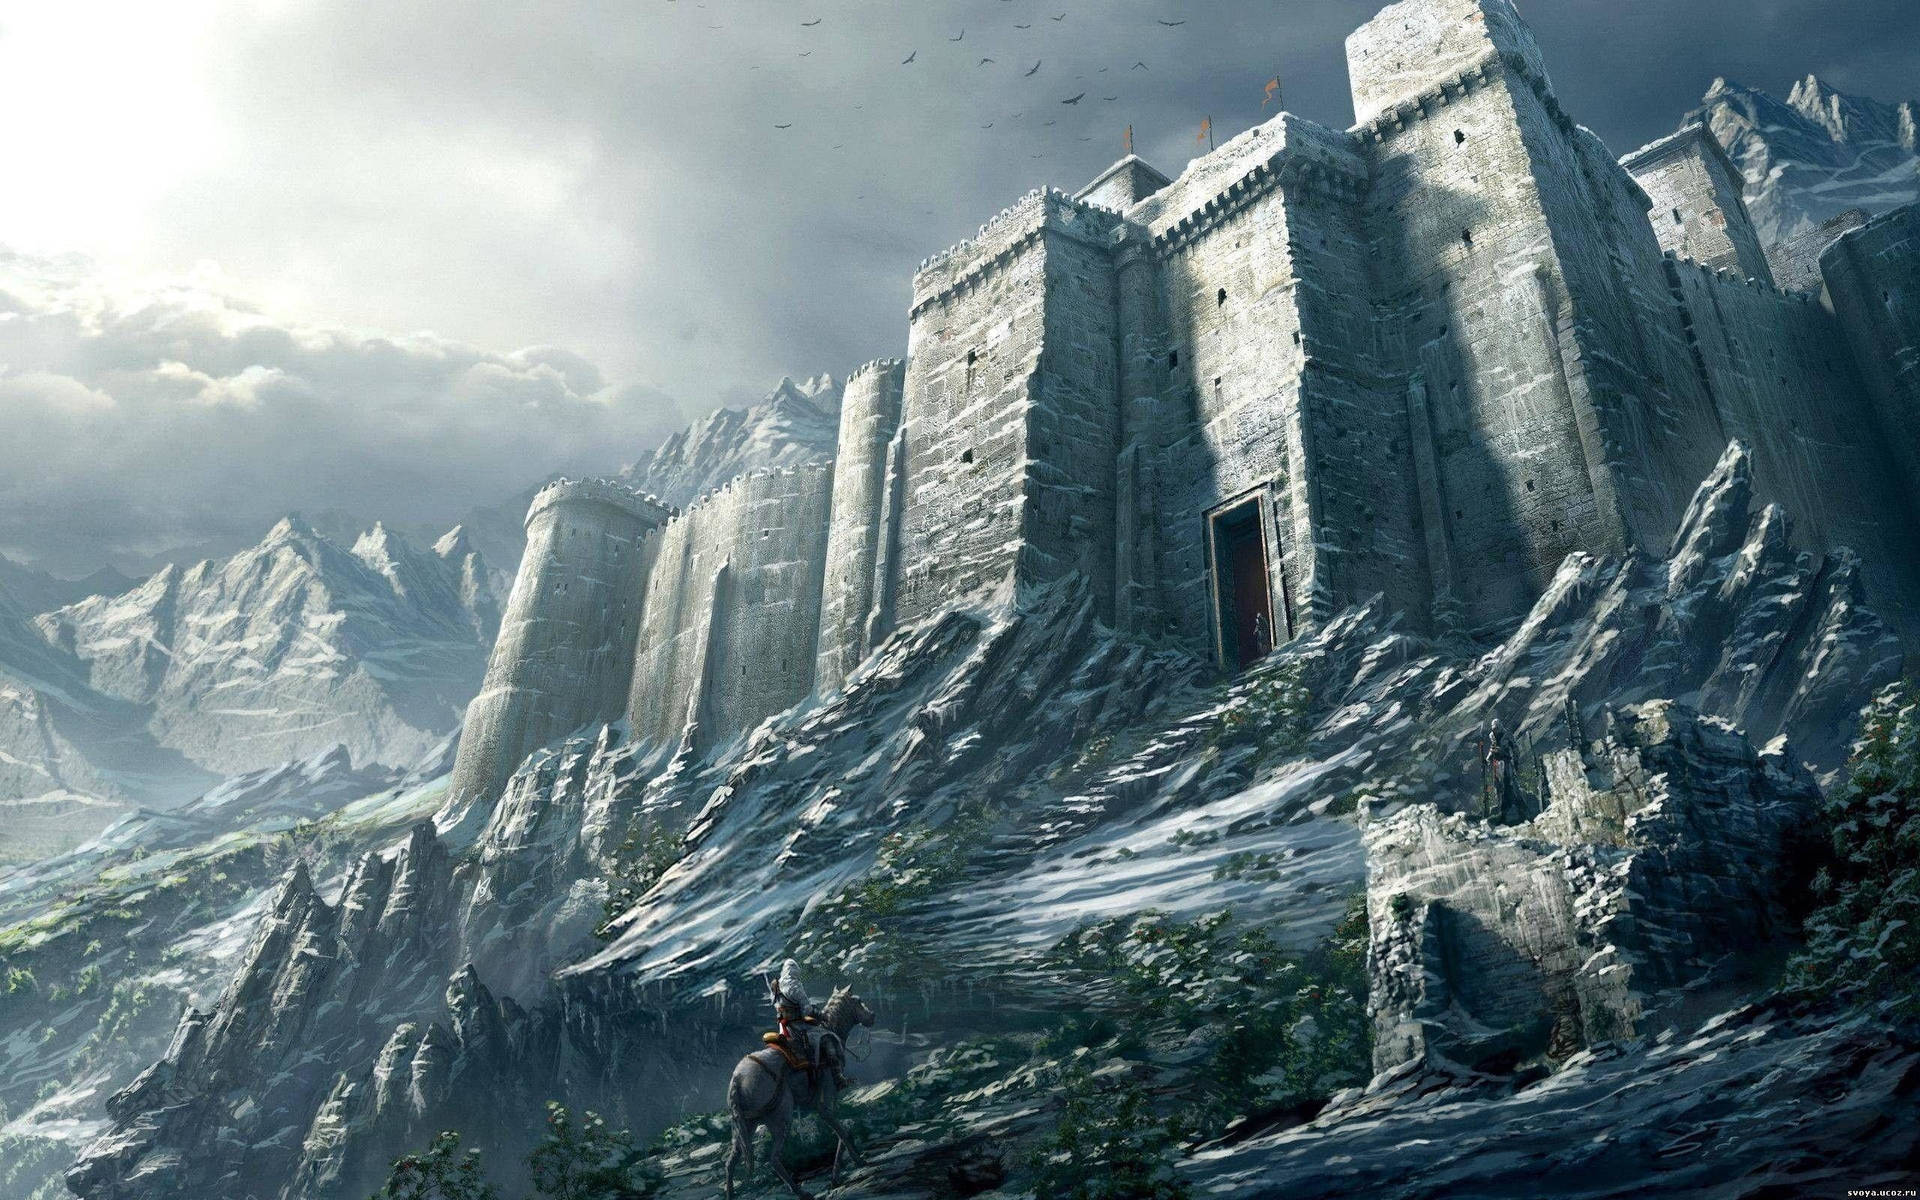 A castle fortress stands tall in the Middle Ages Wallpaper